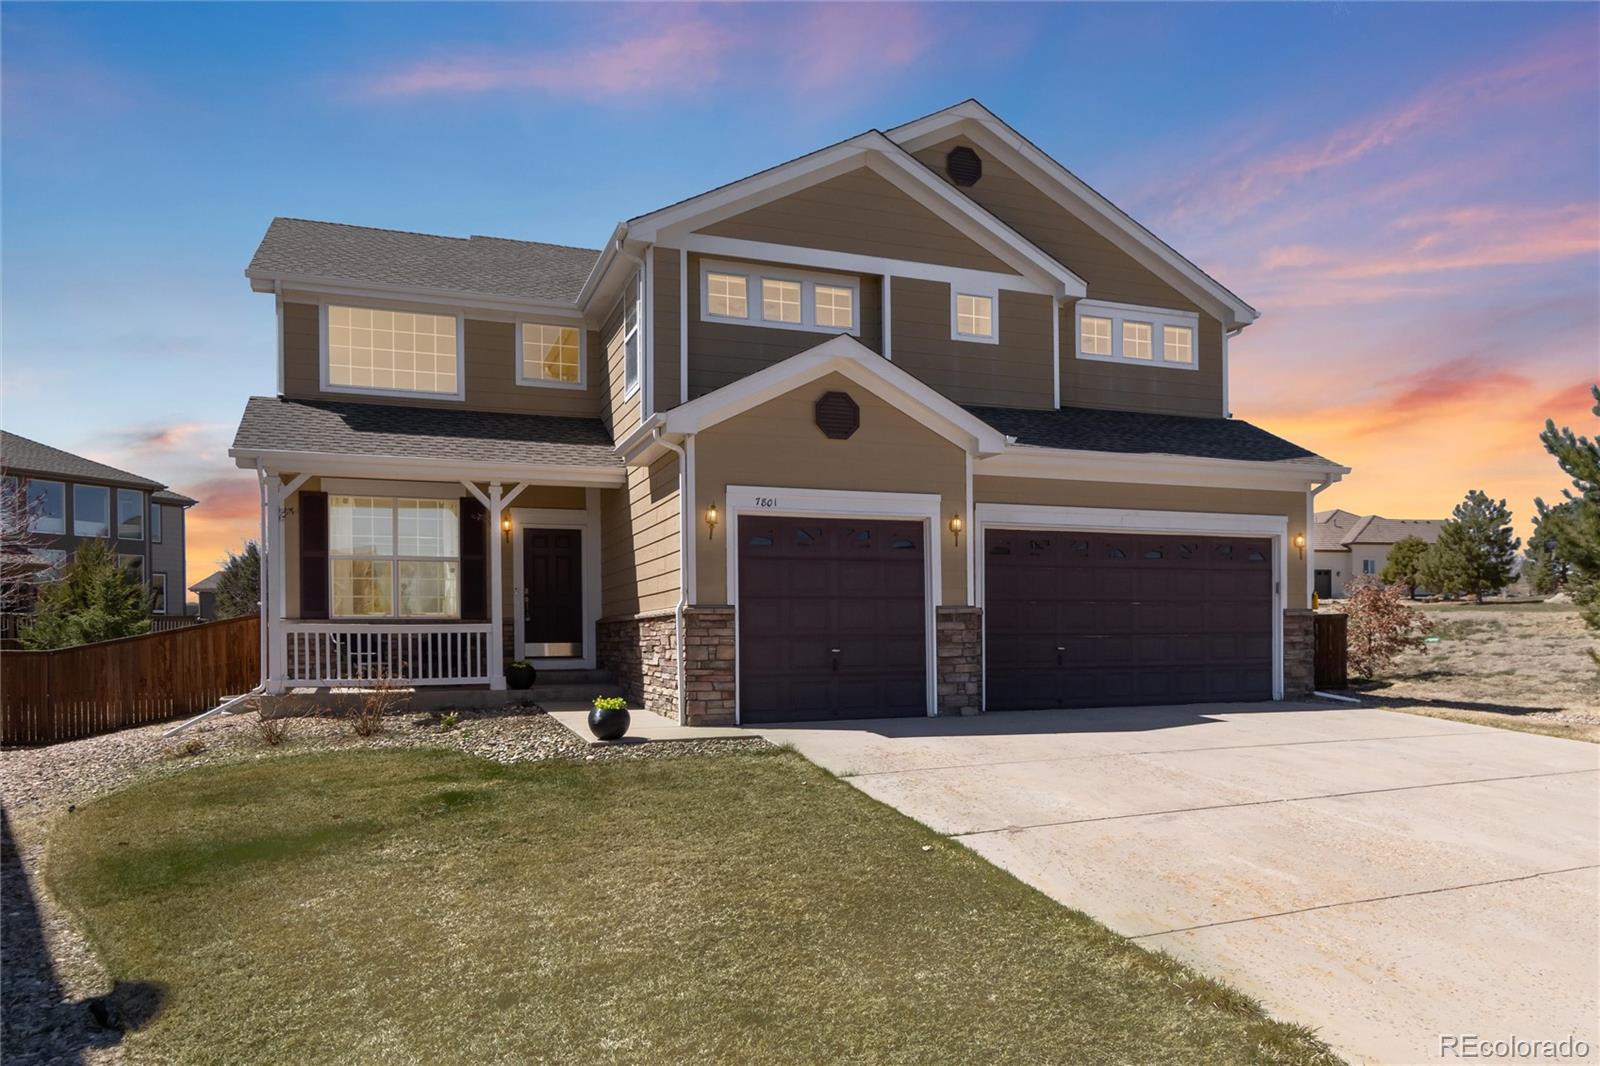 7801  universal court, Castle Rock sold home. Closed on 2024-05-15 for $765,000.